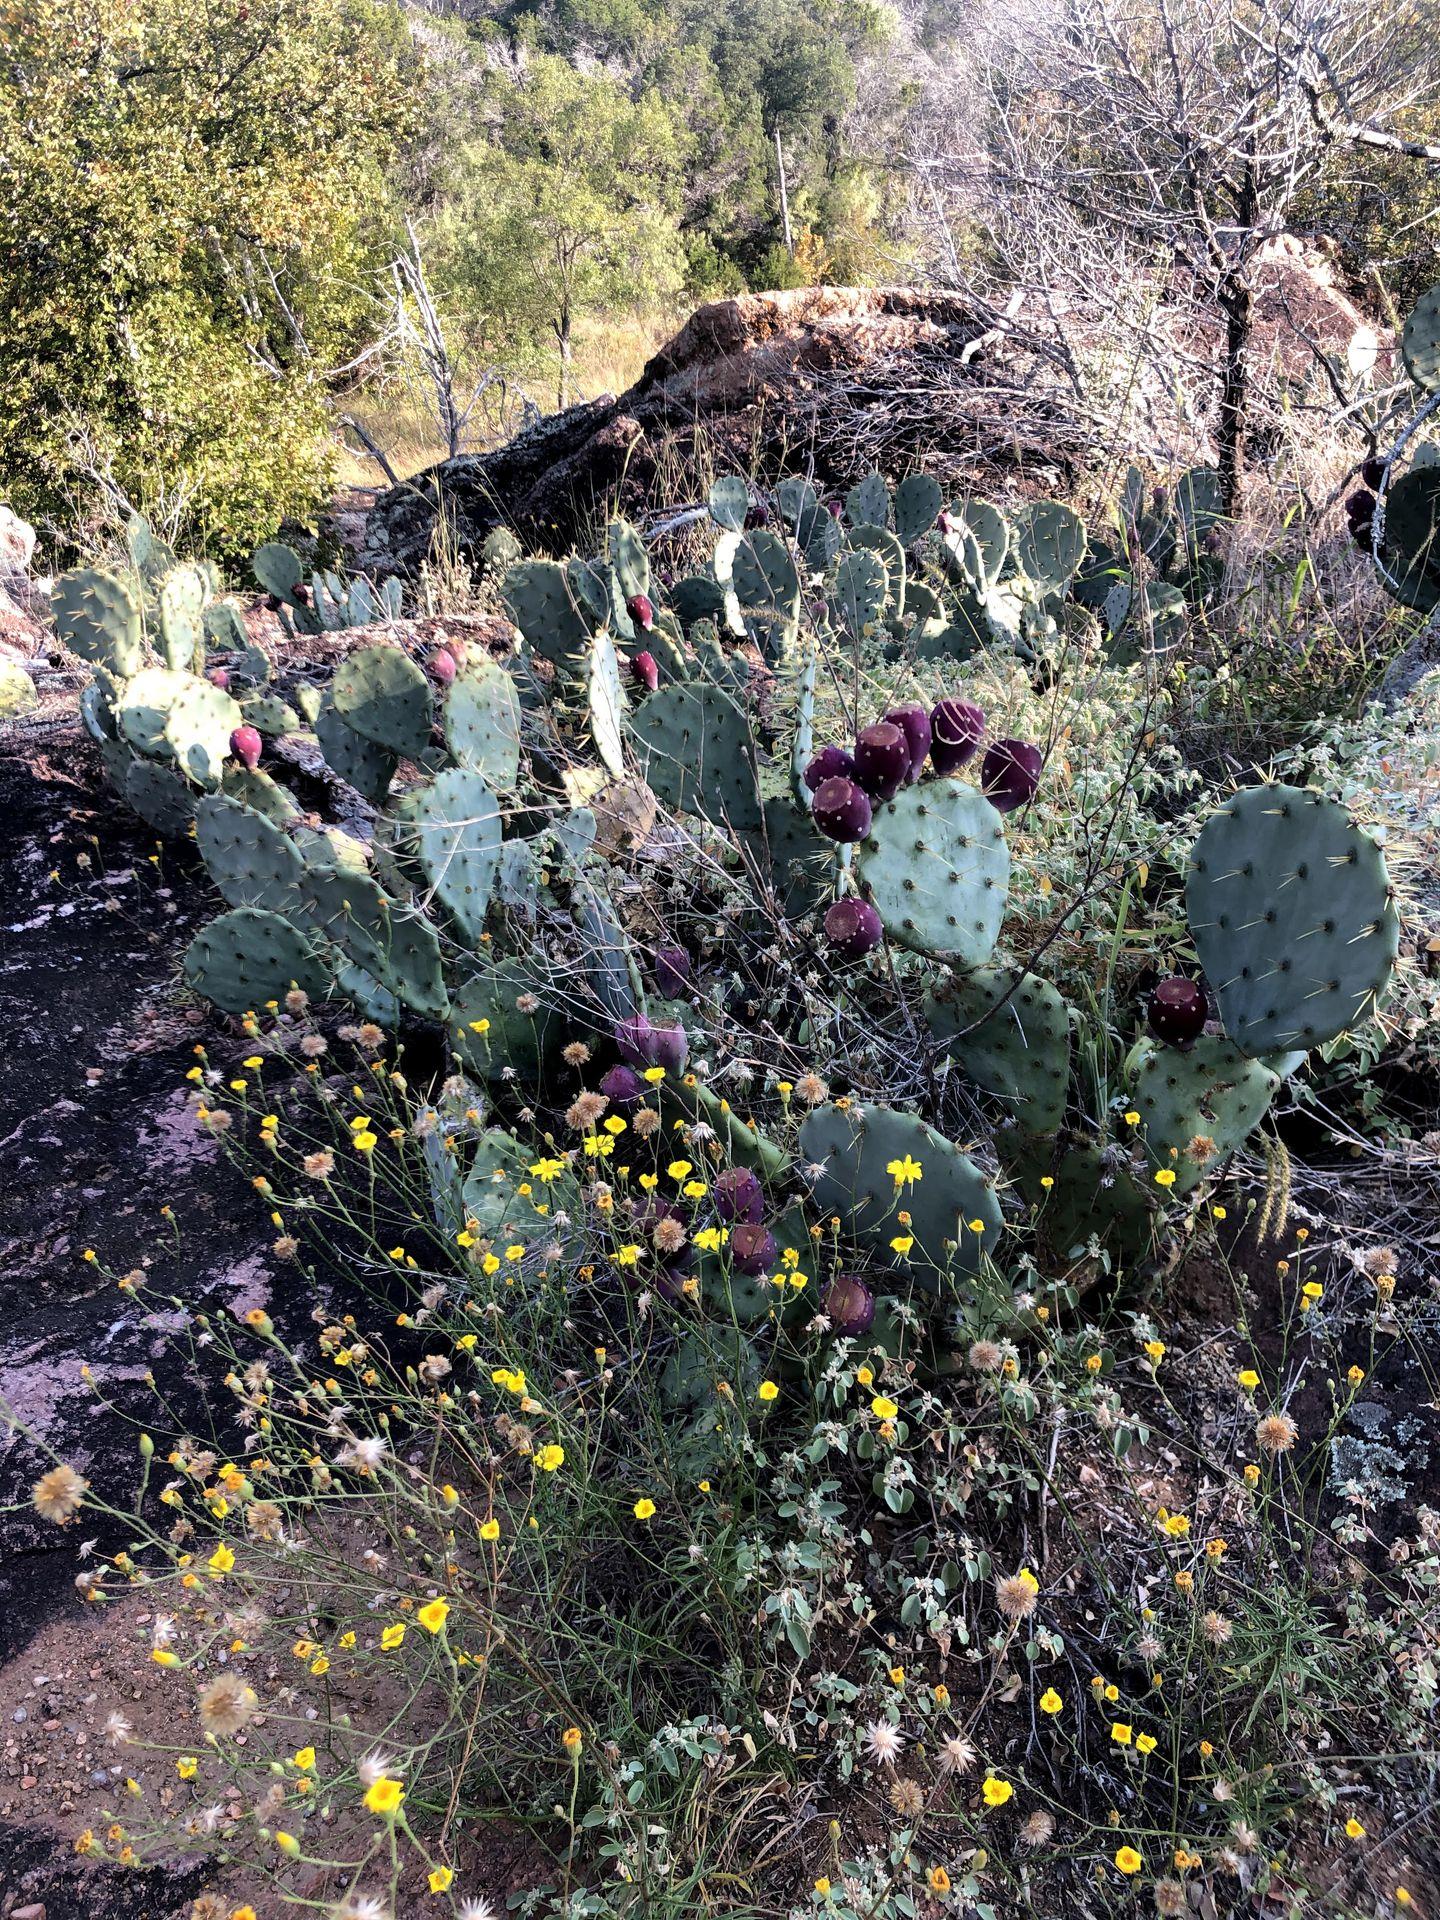 A close up look of flowering cacti and yellow flowers.